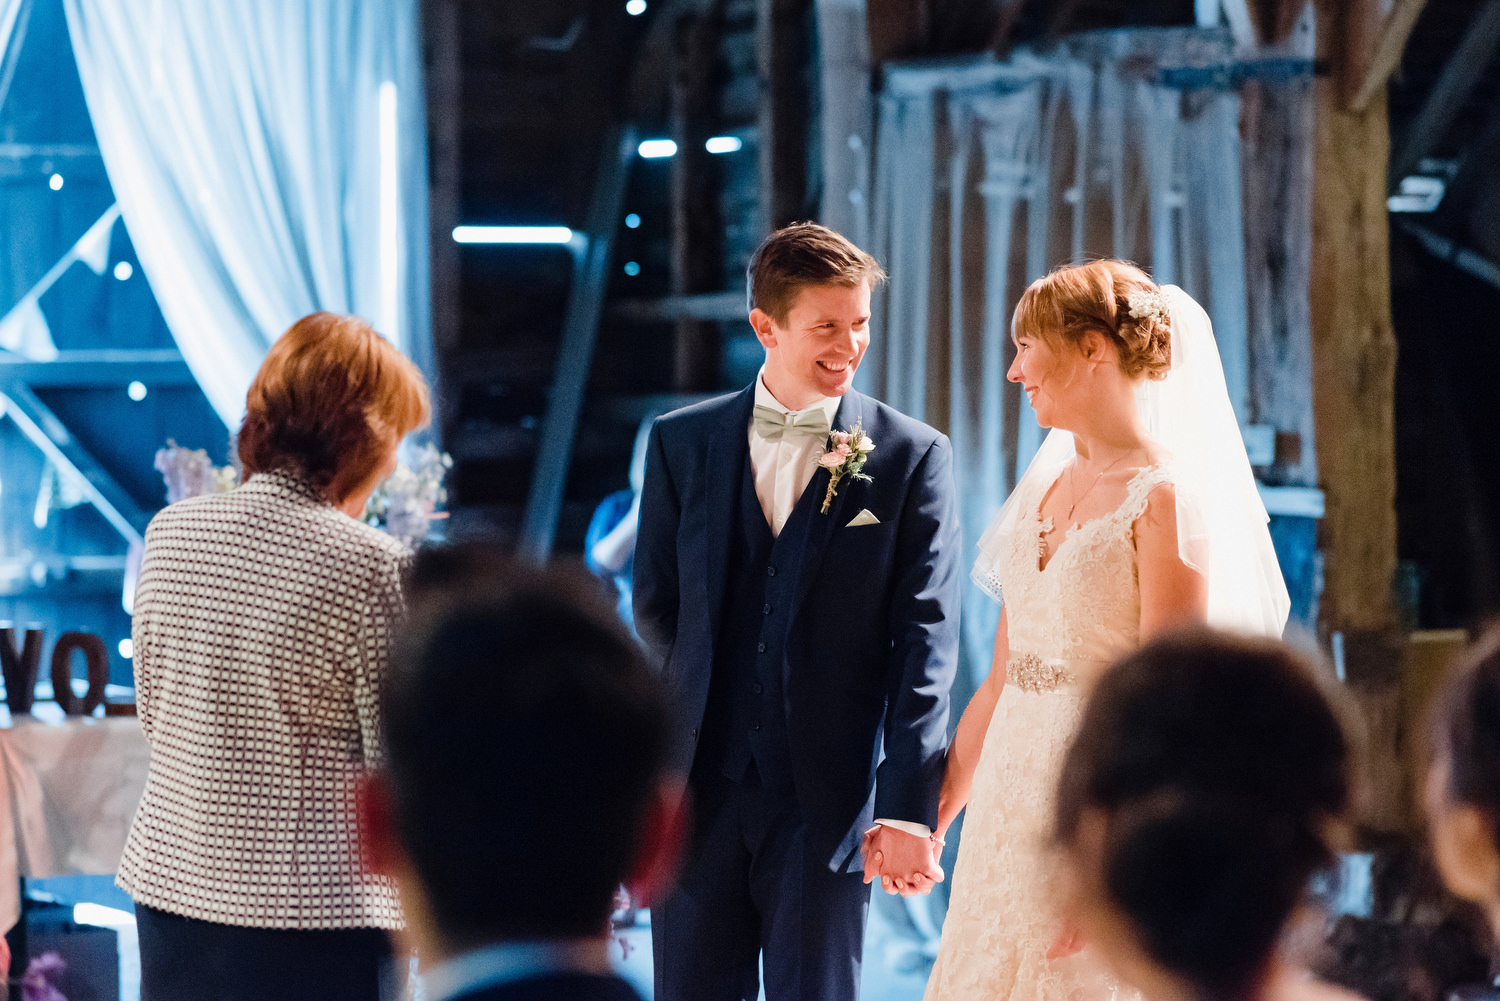 Titchfield wedding at the great hall